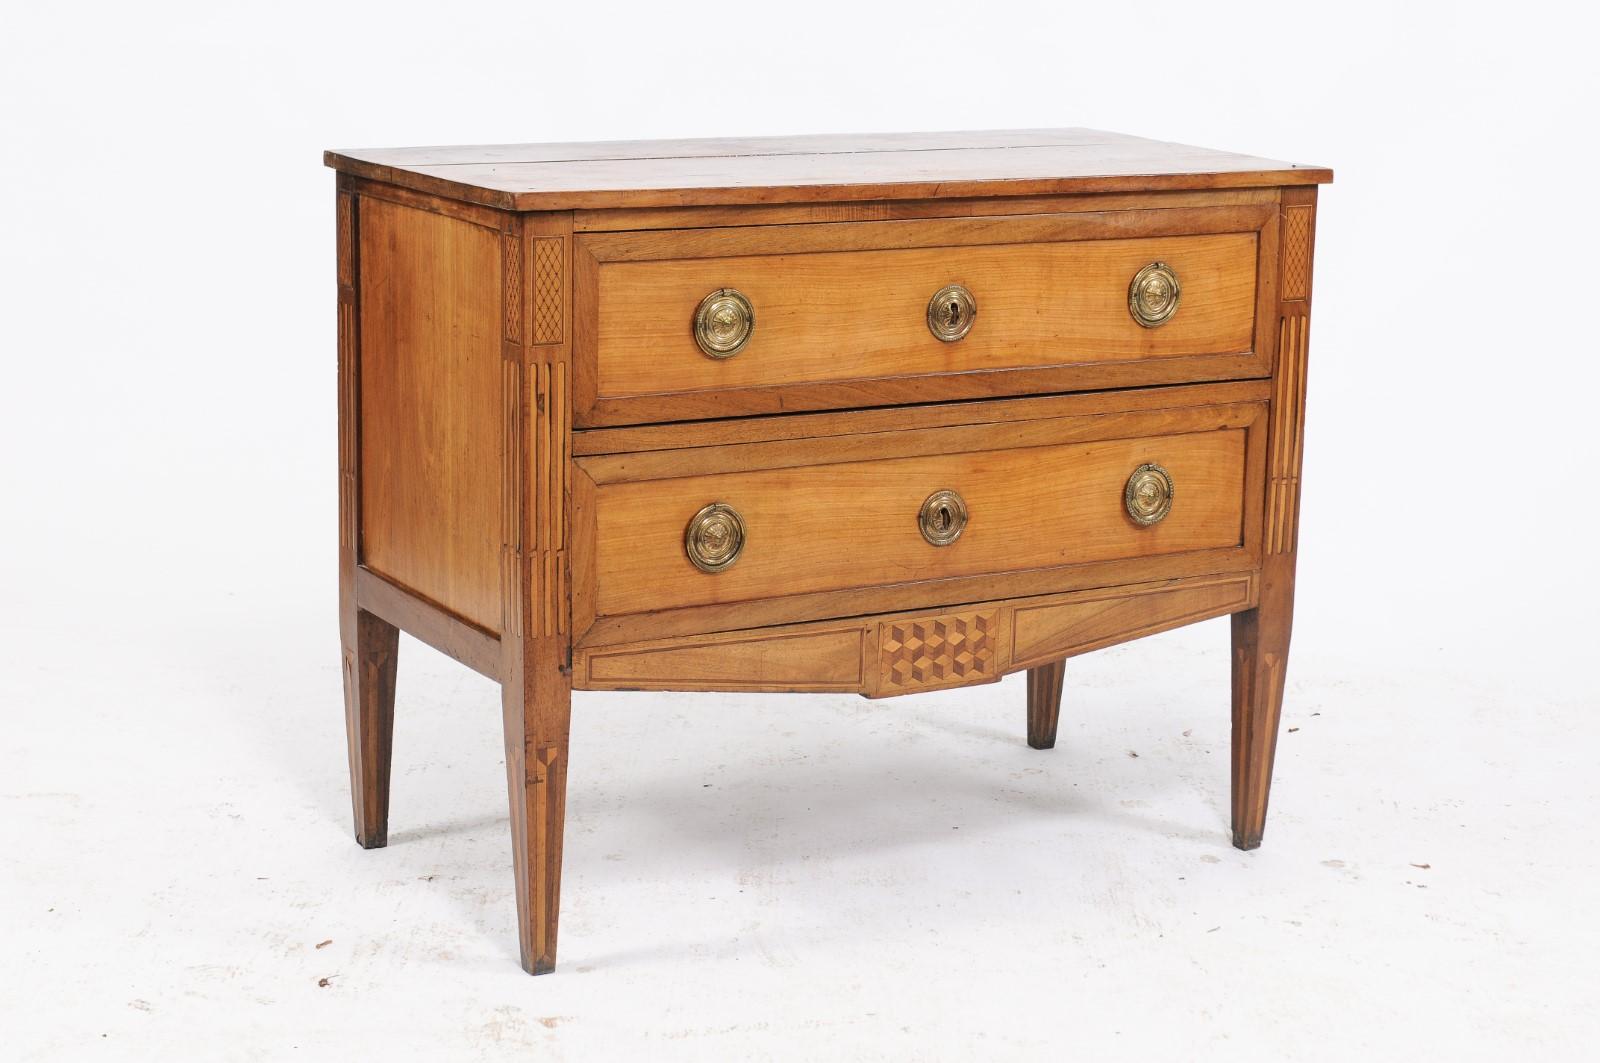 19th Century French Louis XVI Style Pine Two-Drawer Commode with Walnut Marquetry Accents